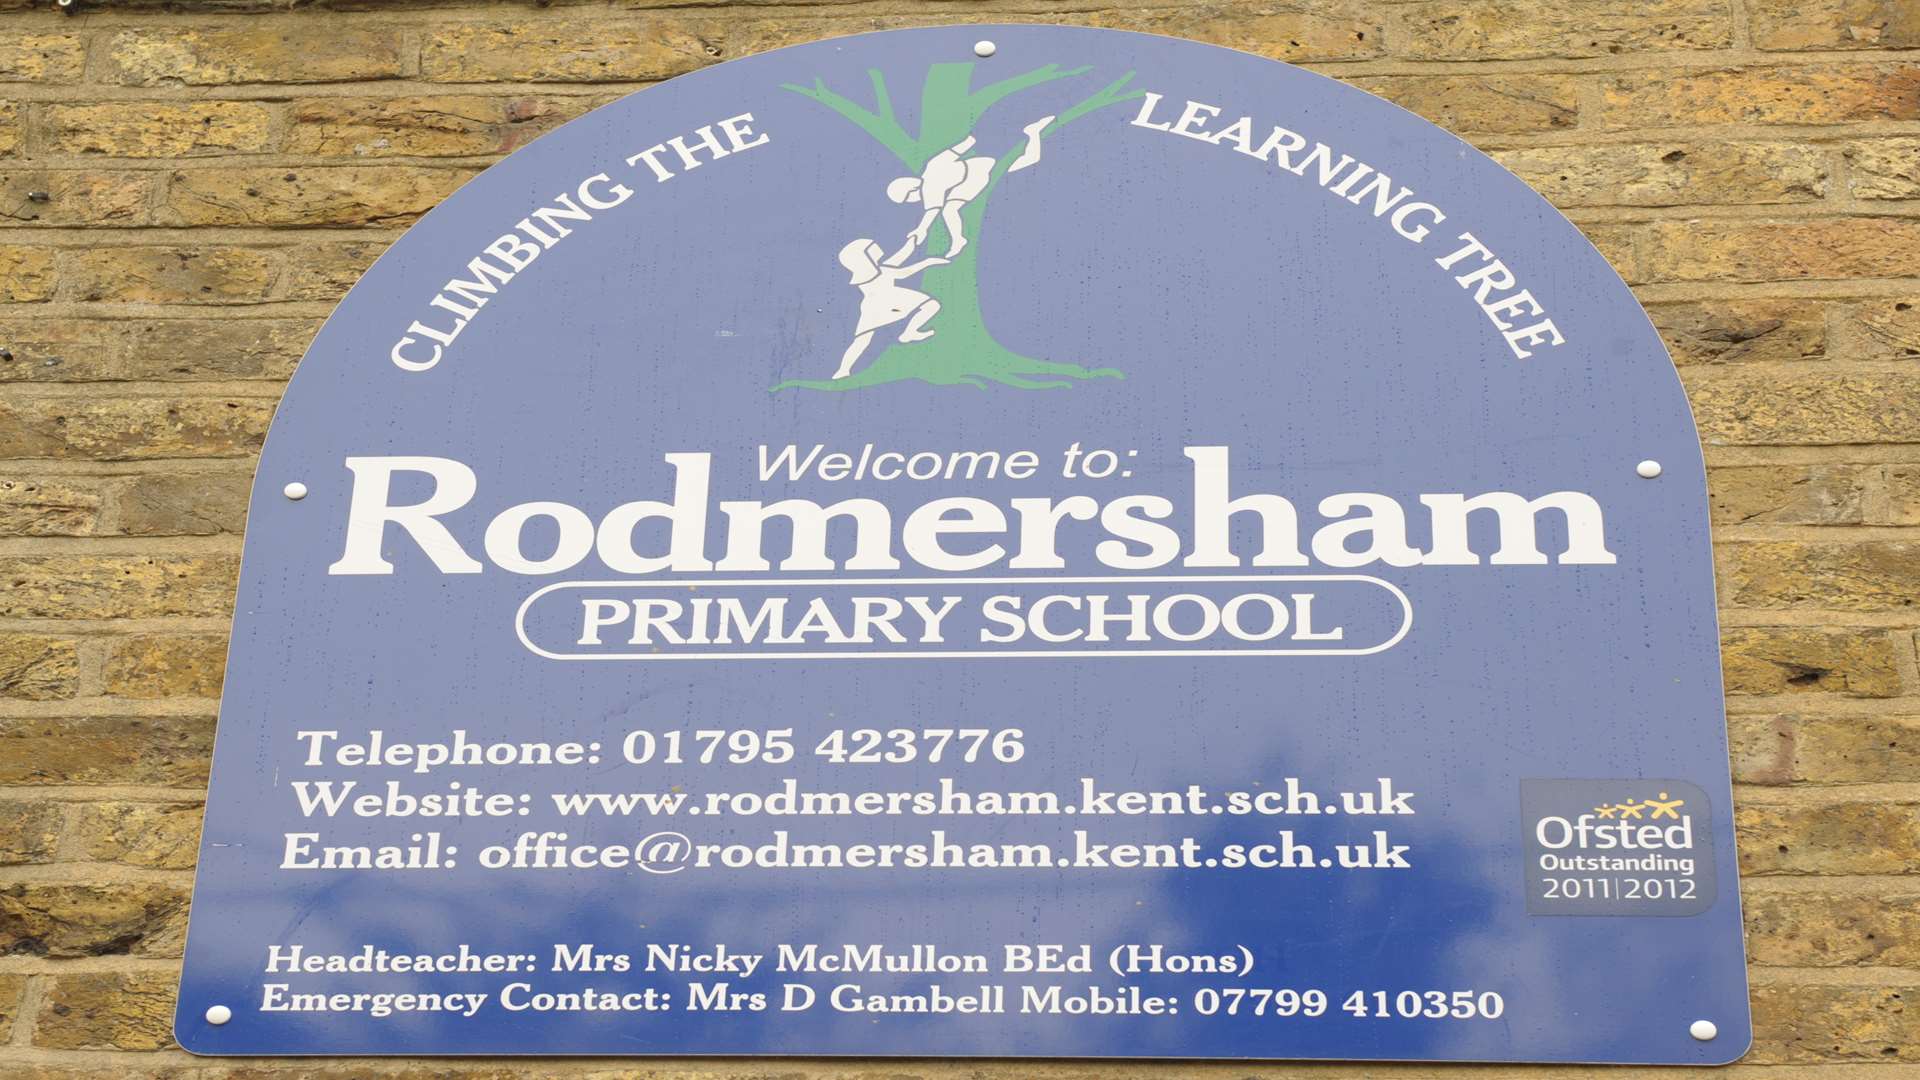 Rodmersham School is on the top 1% of the country